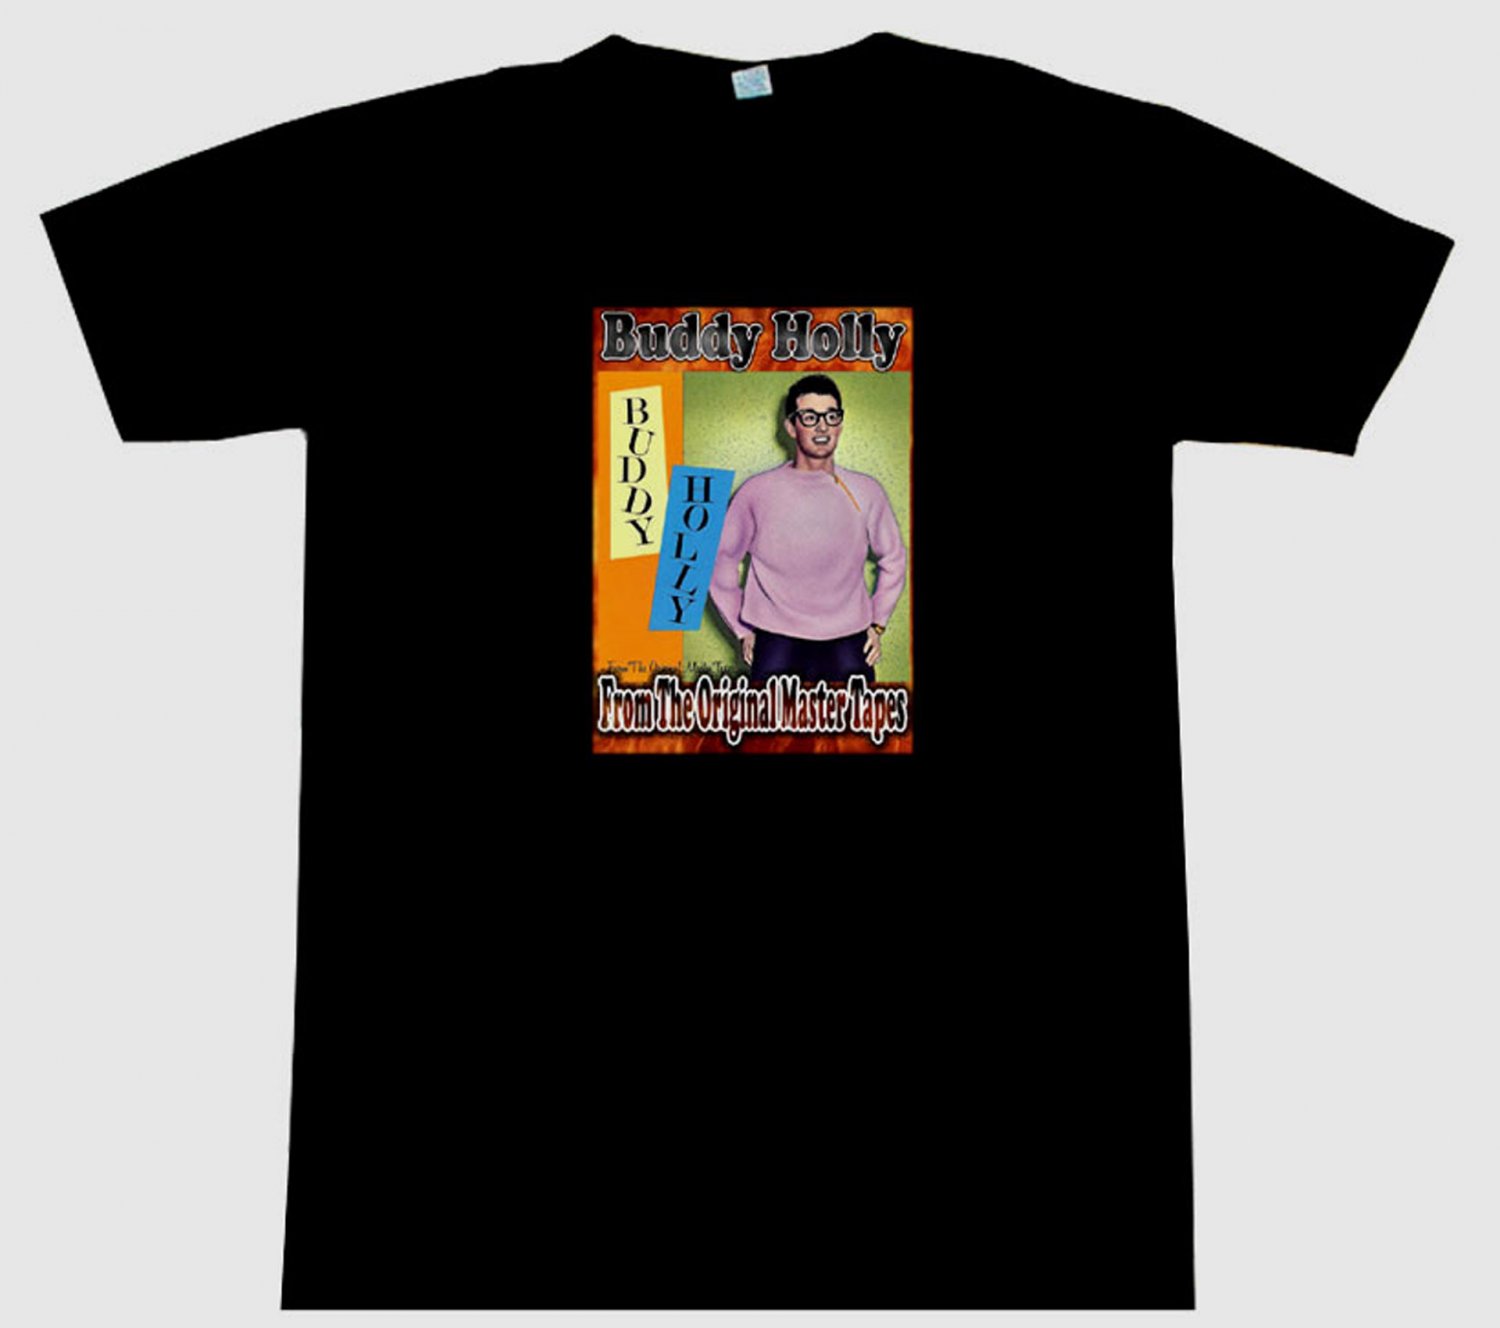 Buddy Holly FROM THE ORIGINAL MASTER TAPES Tee T-Shirt